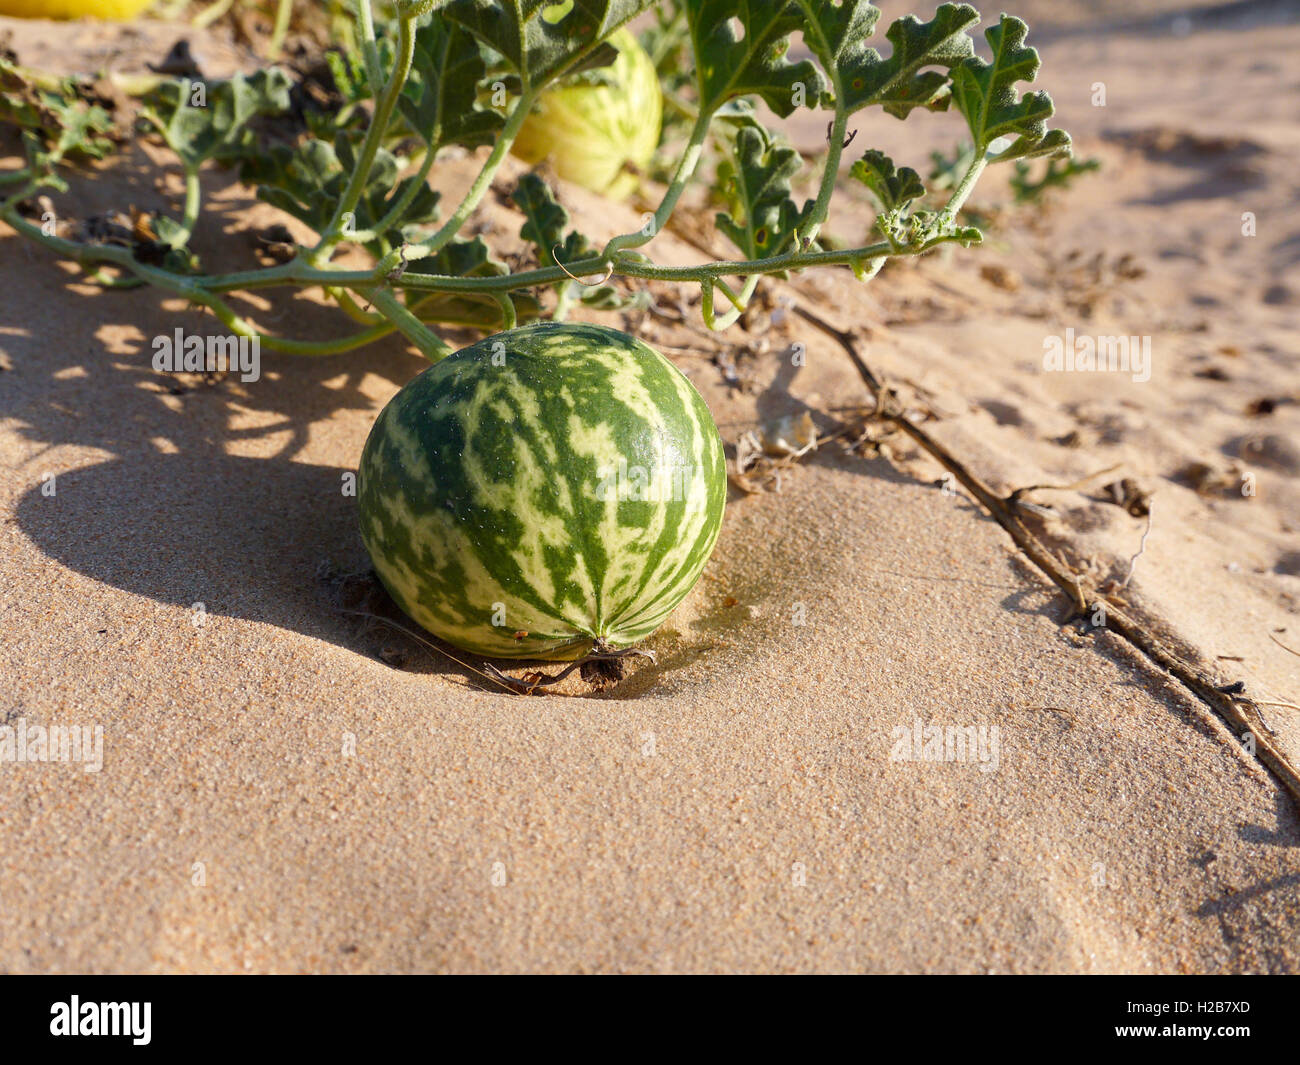 Bitter cucumber colocynthis in the desert Stock Photo